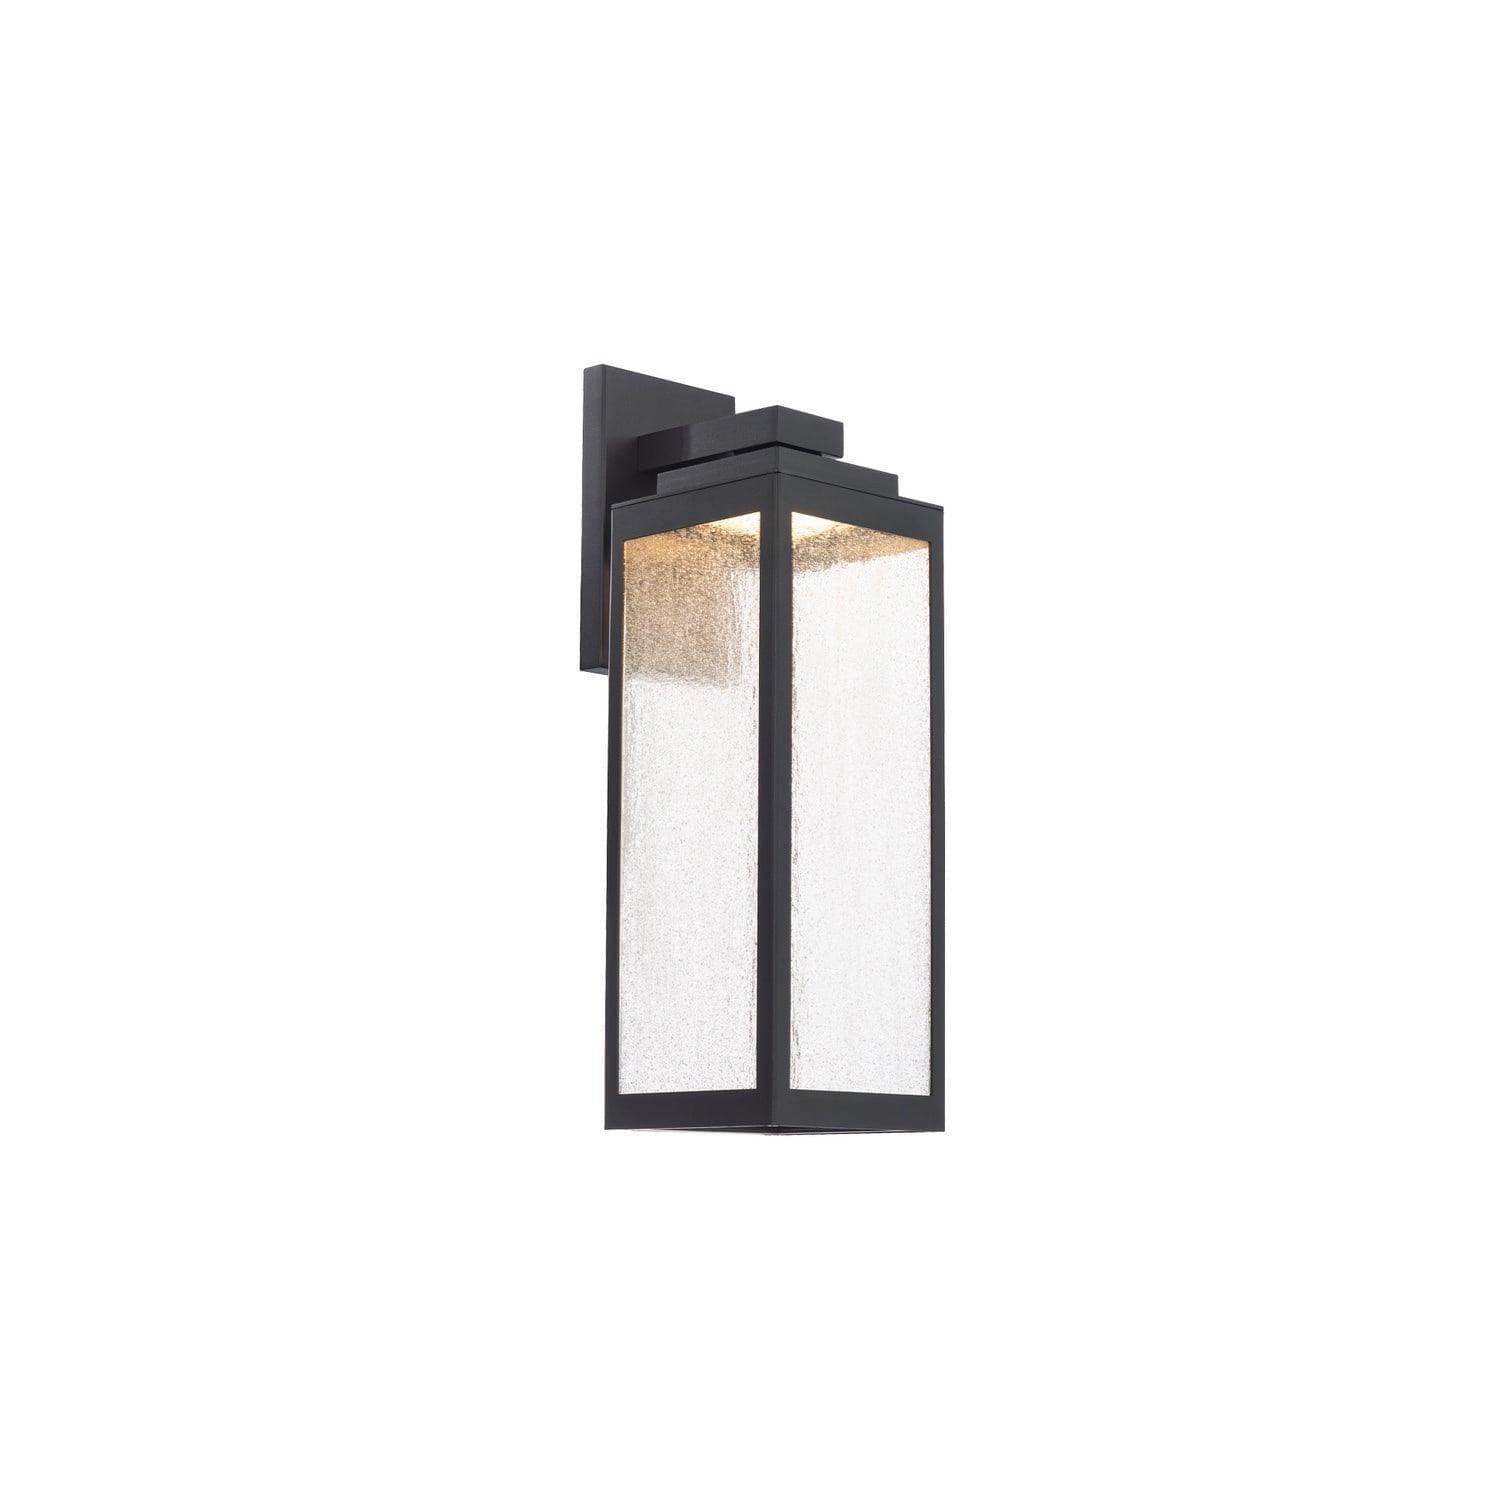 WAC Lighting - Amherst LED Outdoor Wall Sconce - WS-W17218-BK | Montreal Lighting & Hardware